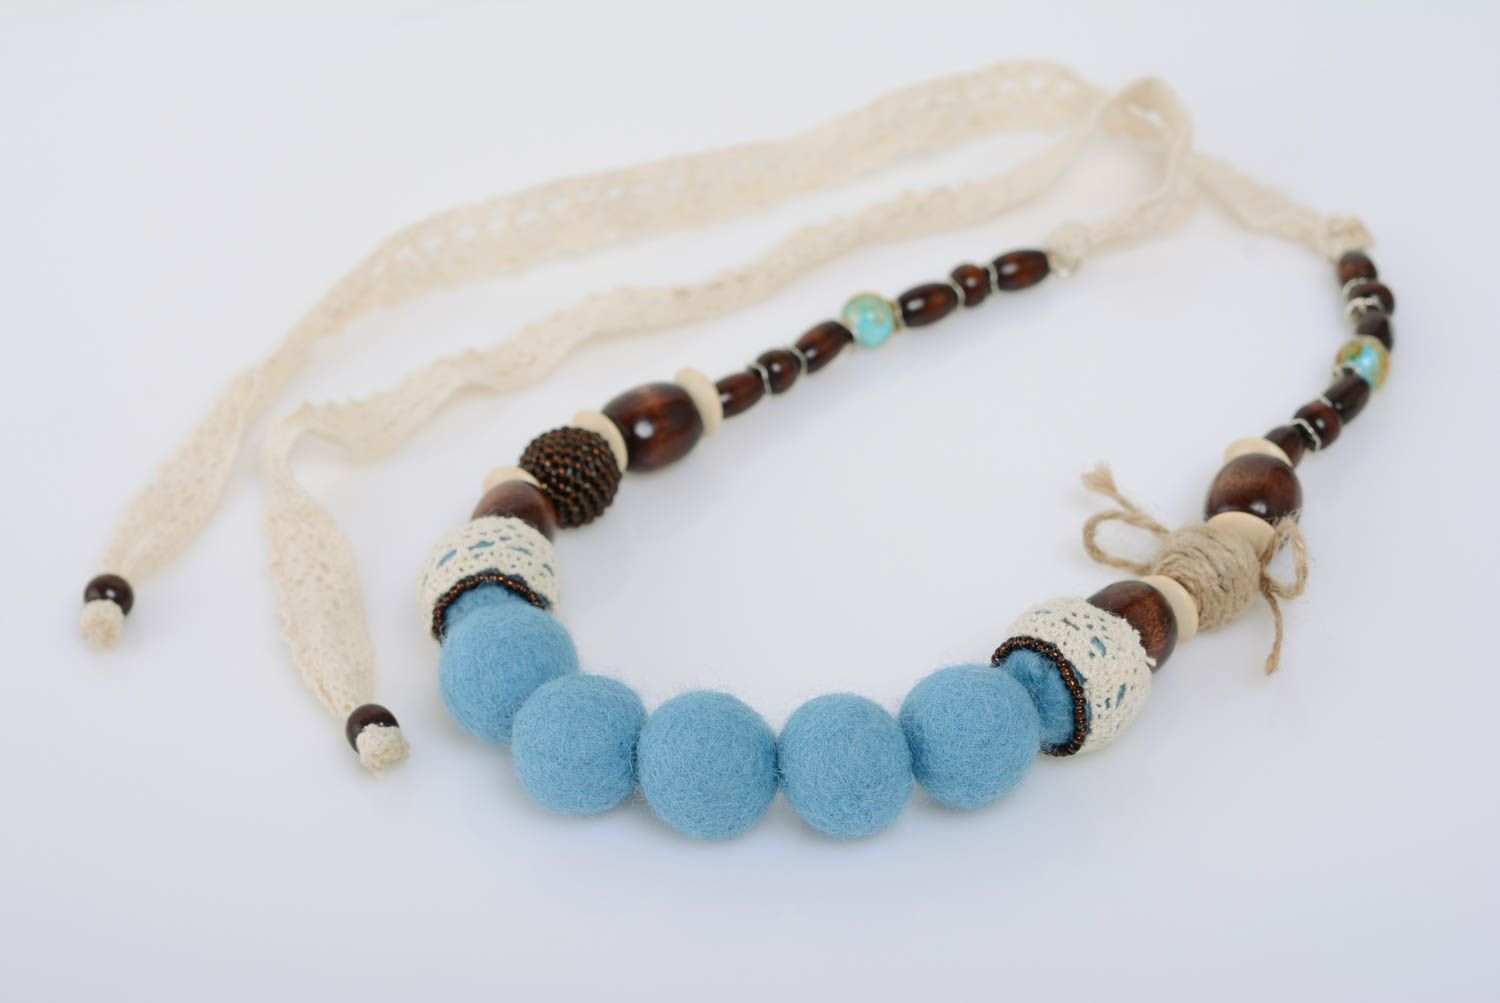 Handmade blue felted wool bead necklace with wooden beads and light lace photo 1